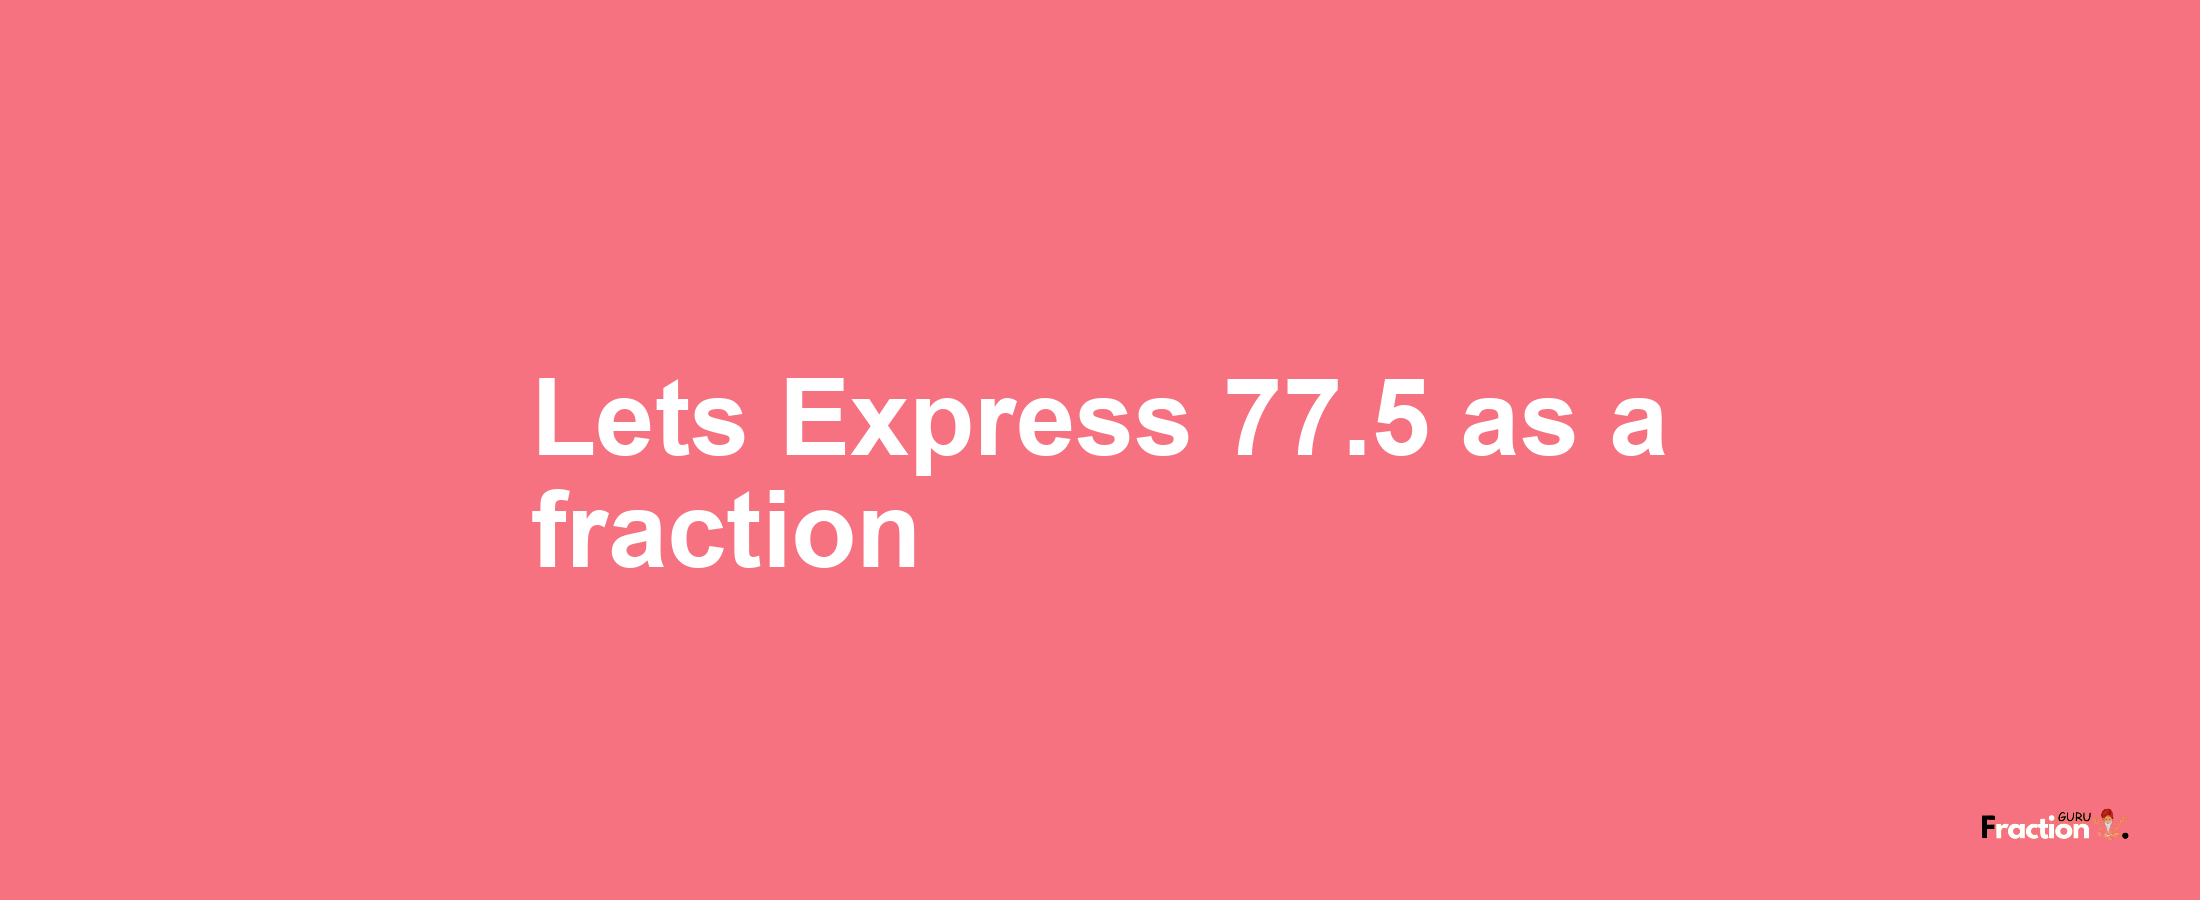 Lets Express 77.5 as afraction